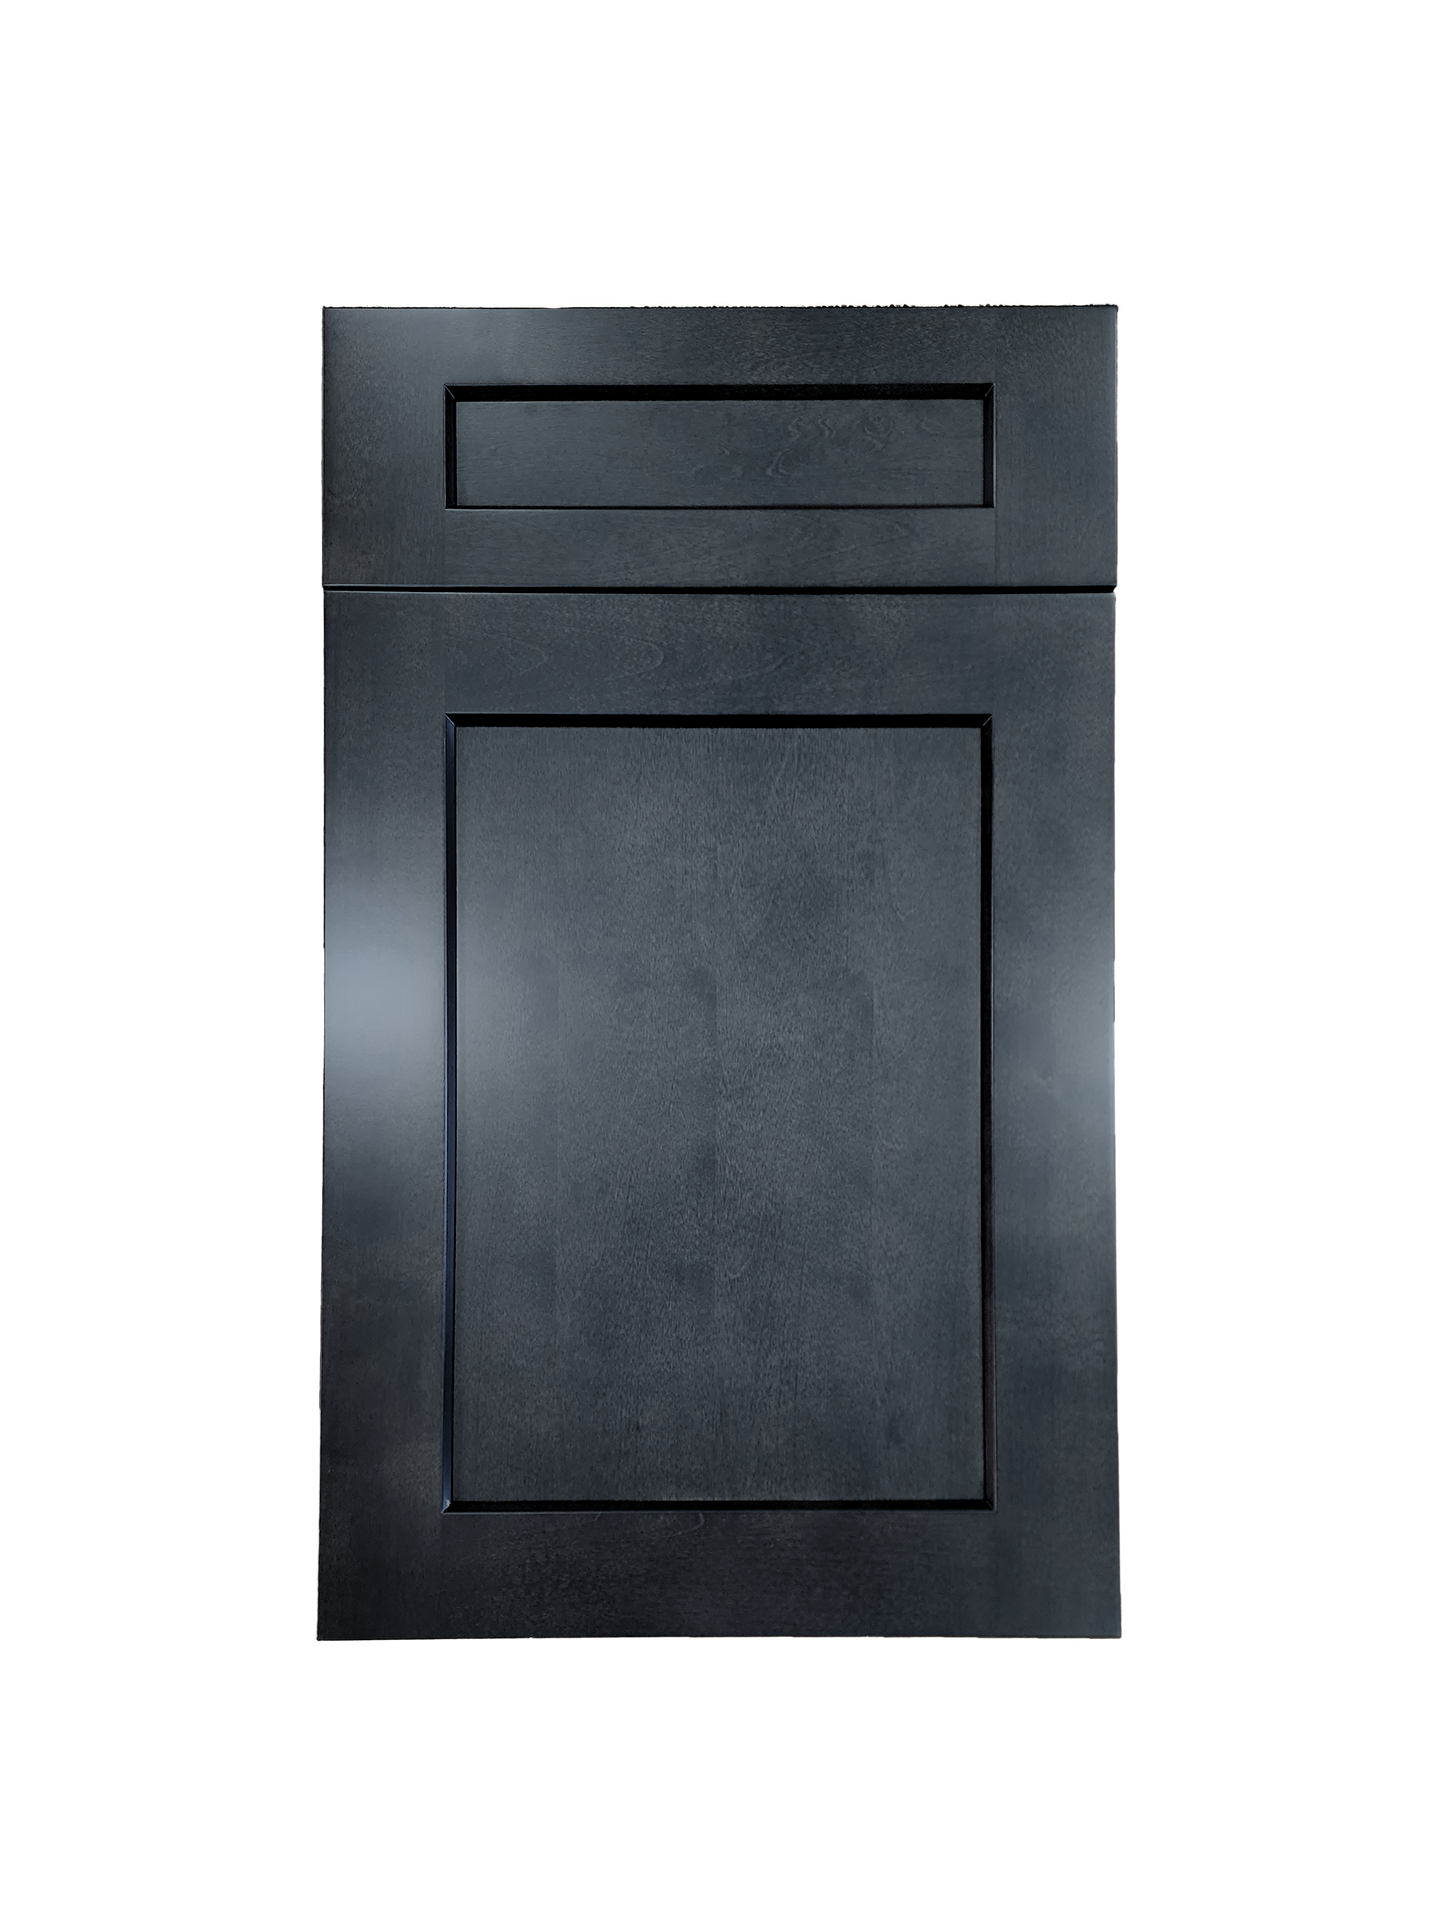 Stormy Grey Wall Cabinet 24 inches wide 12 inches deep 12 inches tall with Stormy Grey box and Stormy Grey doors